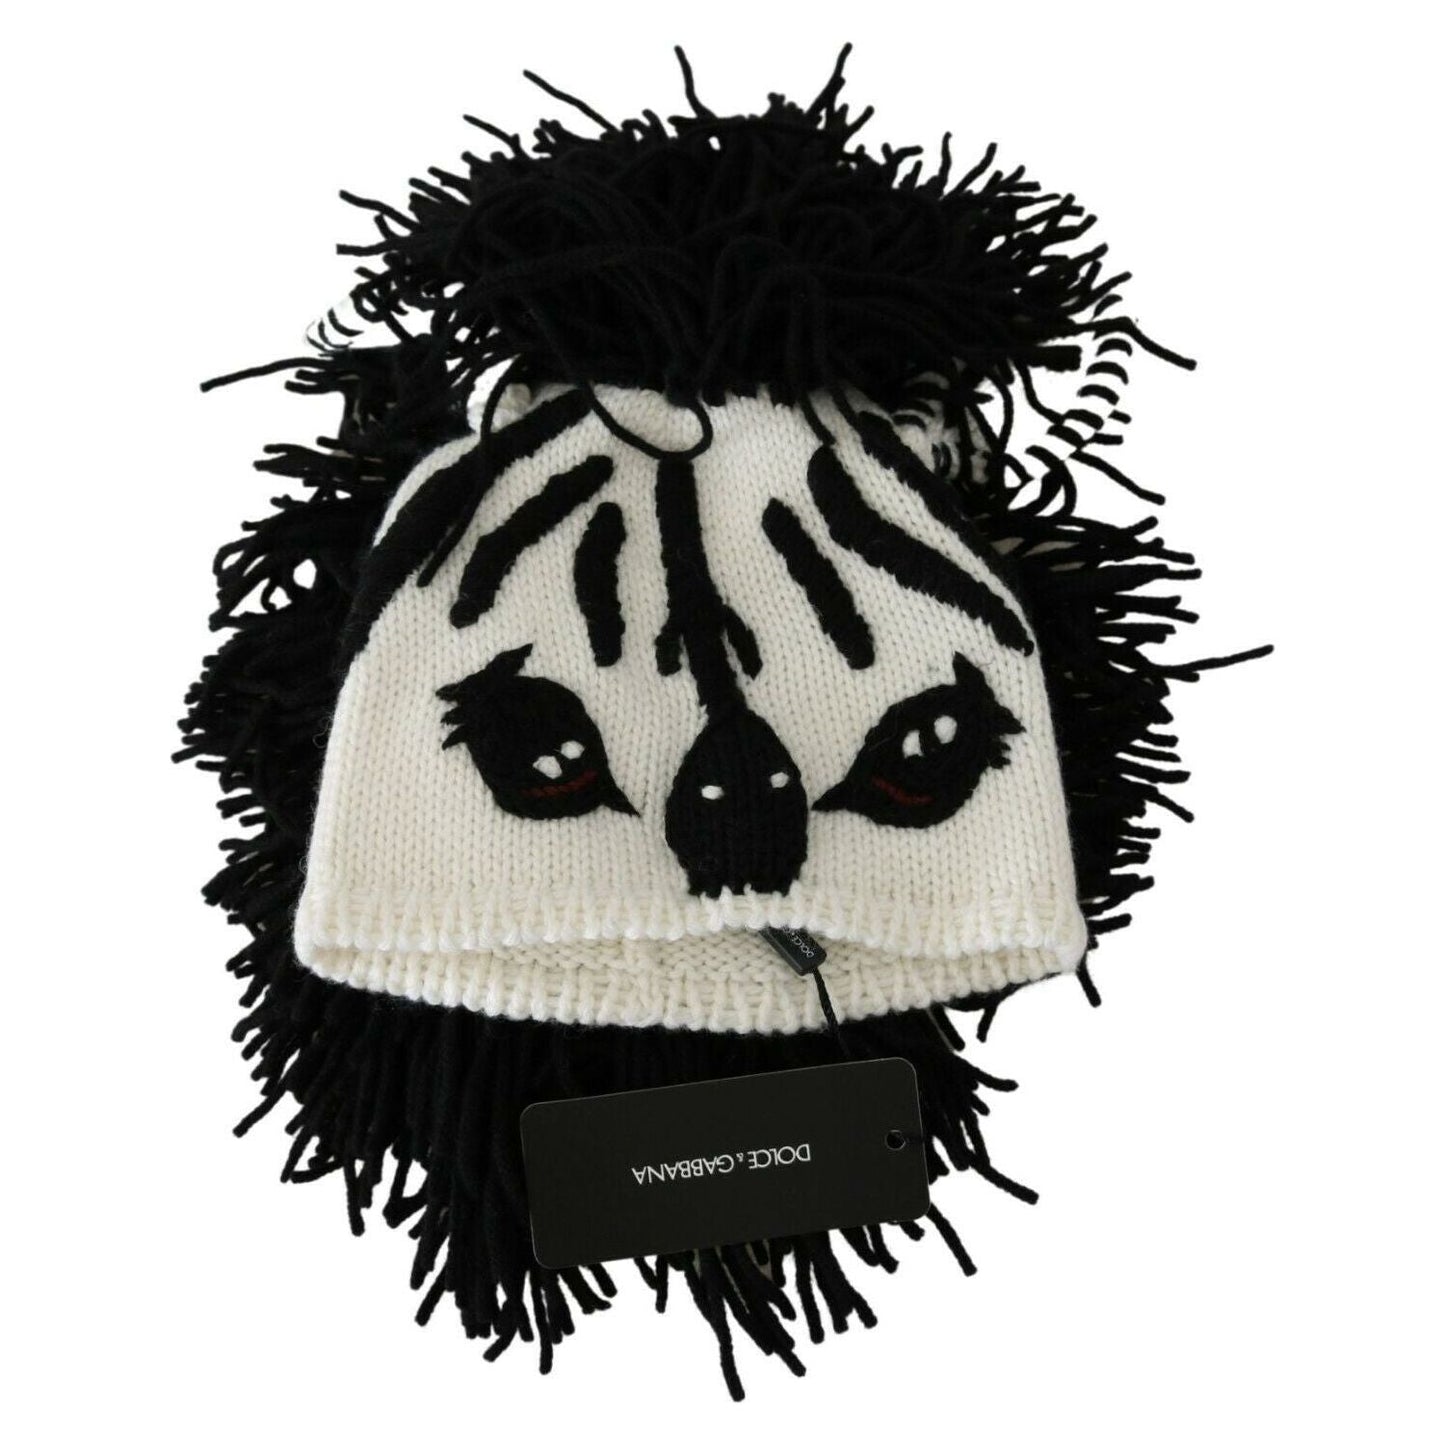 Dolce & Gabbana Black and White Knitted Cashmere Beanie black-white-knitted-cashmere-animal-design-hat WOMAN HATS